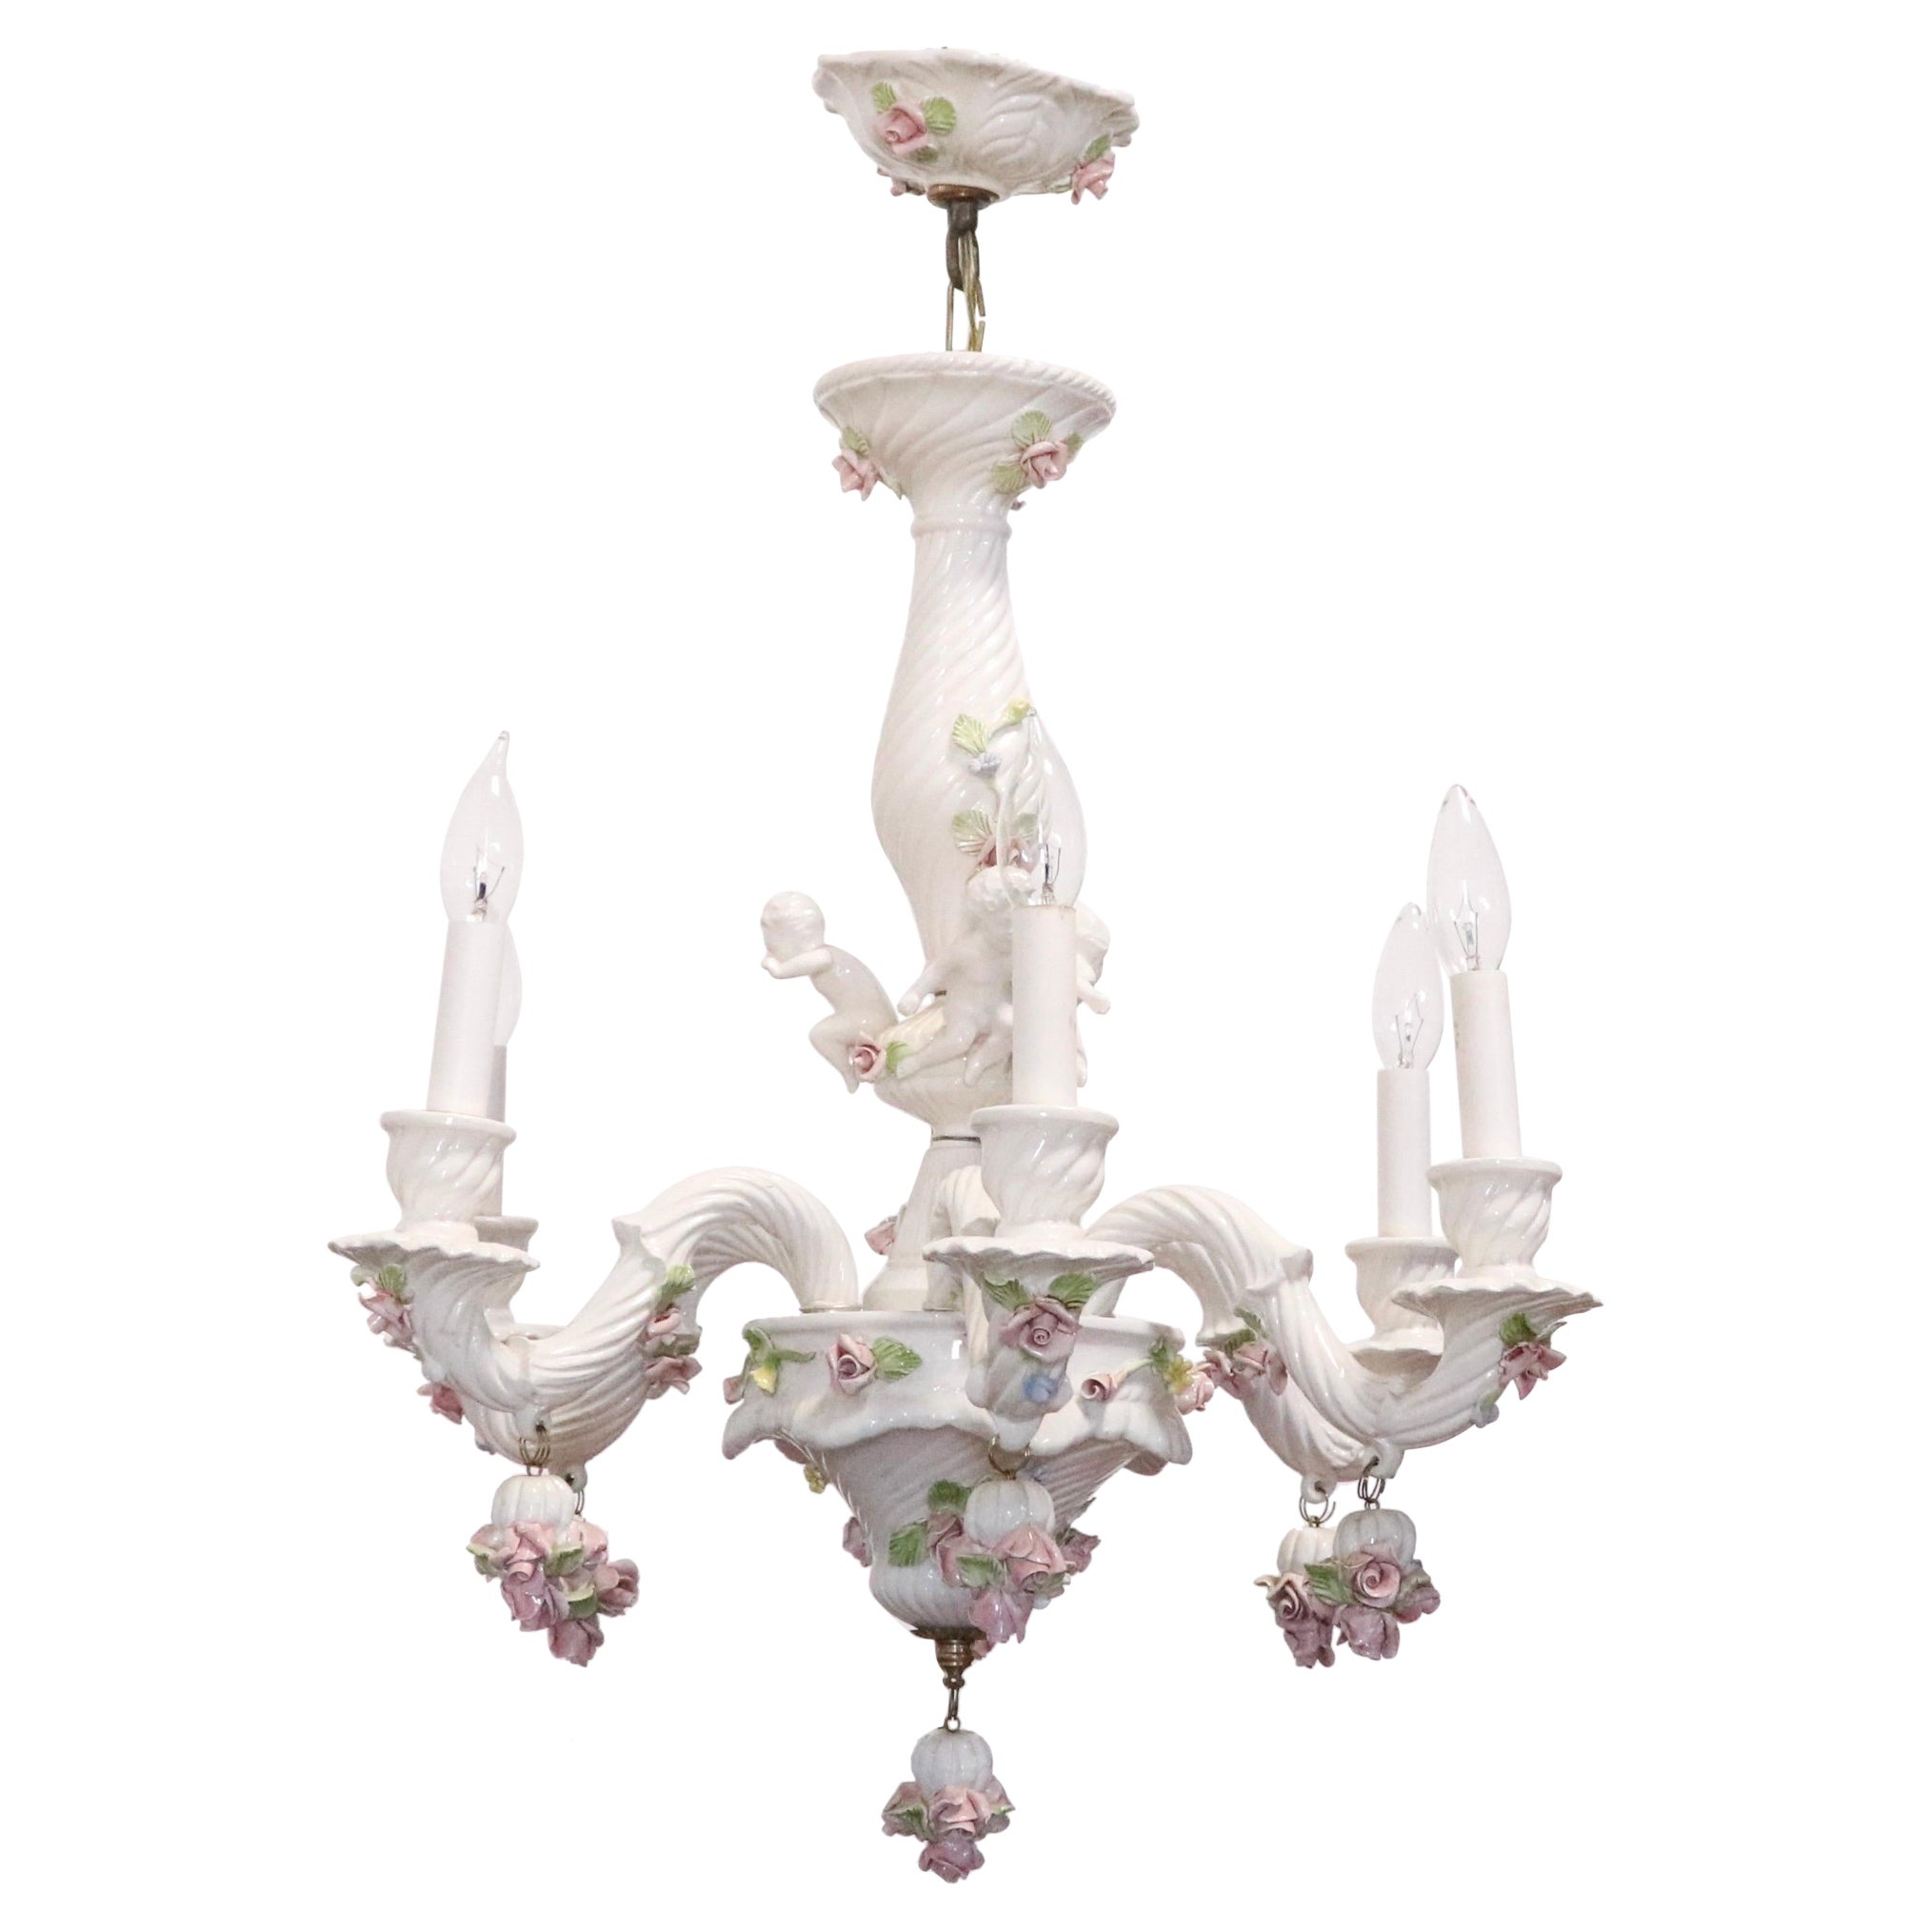 Capodimonte Style Fanciful White Porcelain Chandelier